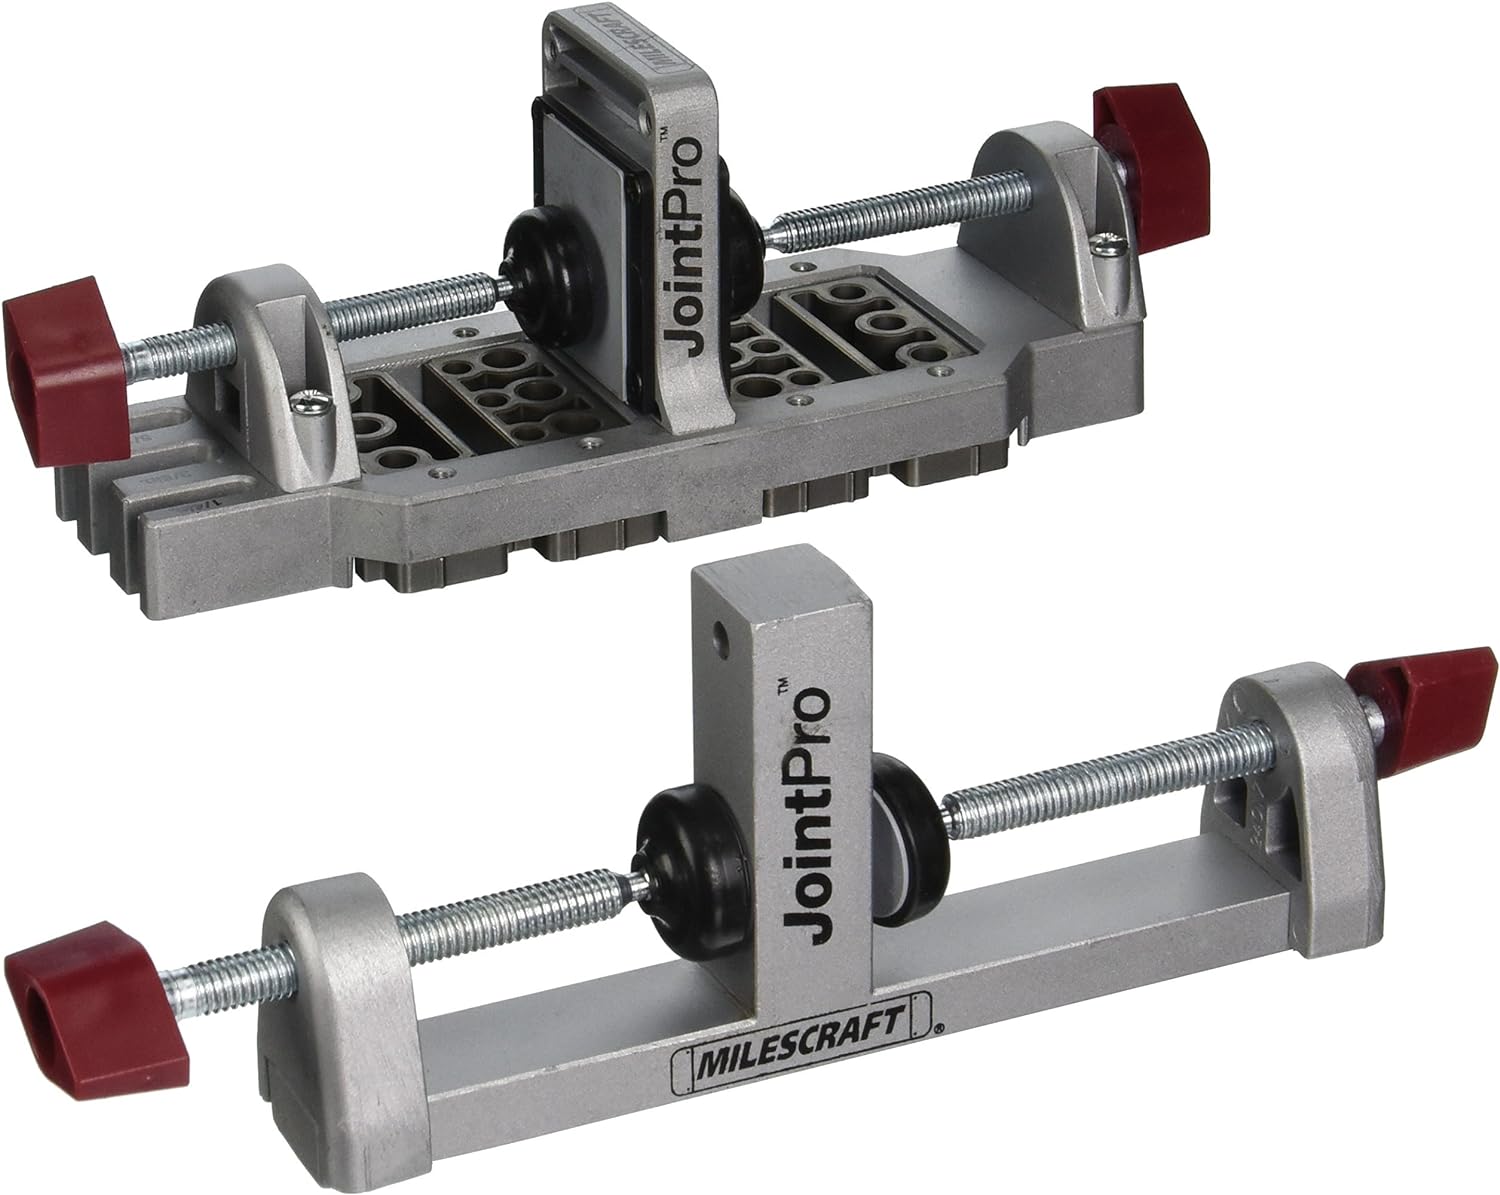 Milescraft Inc. Milescraft 1311 Joint Pro Professional, Self-Clamping All Steel Doweling Jig - Professional Quality - Includes 4 Guide Bushings